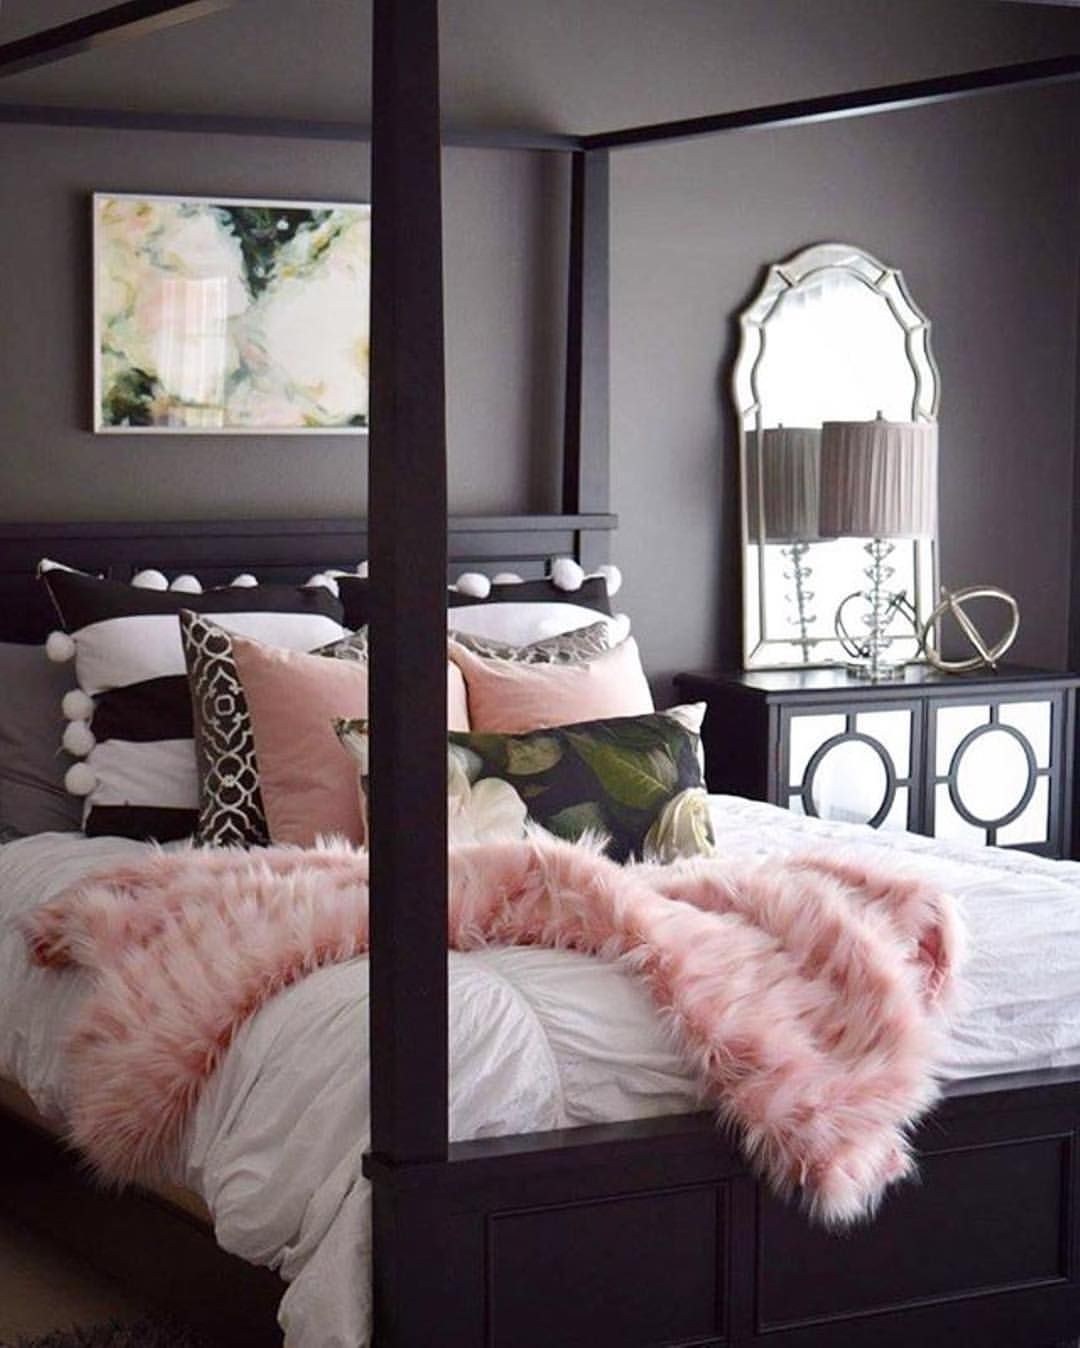 7,104 Likes, 70 Comments – #LTKhome (@liketoknow.it.home) on Instagram: “Pink faux, mixed prints and chic mirrored accents, glam